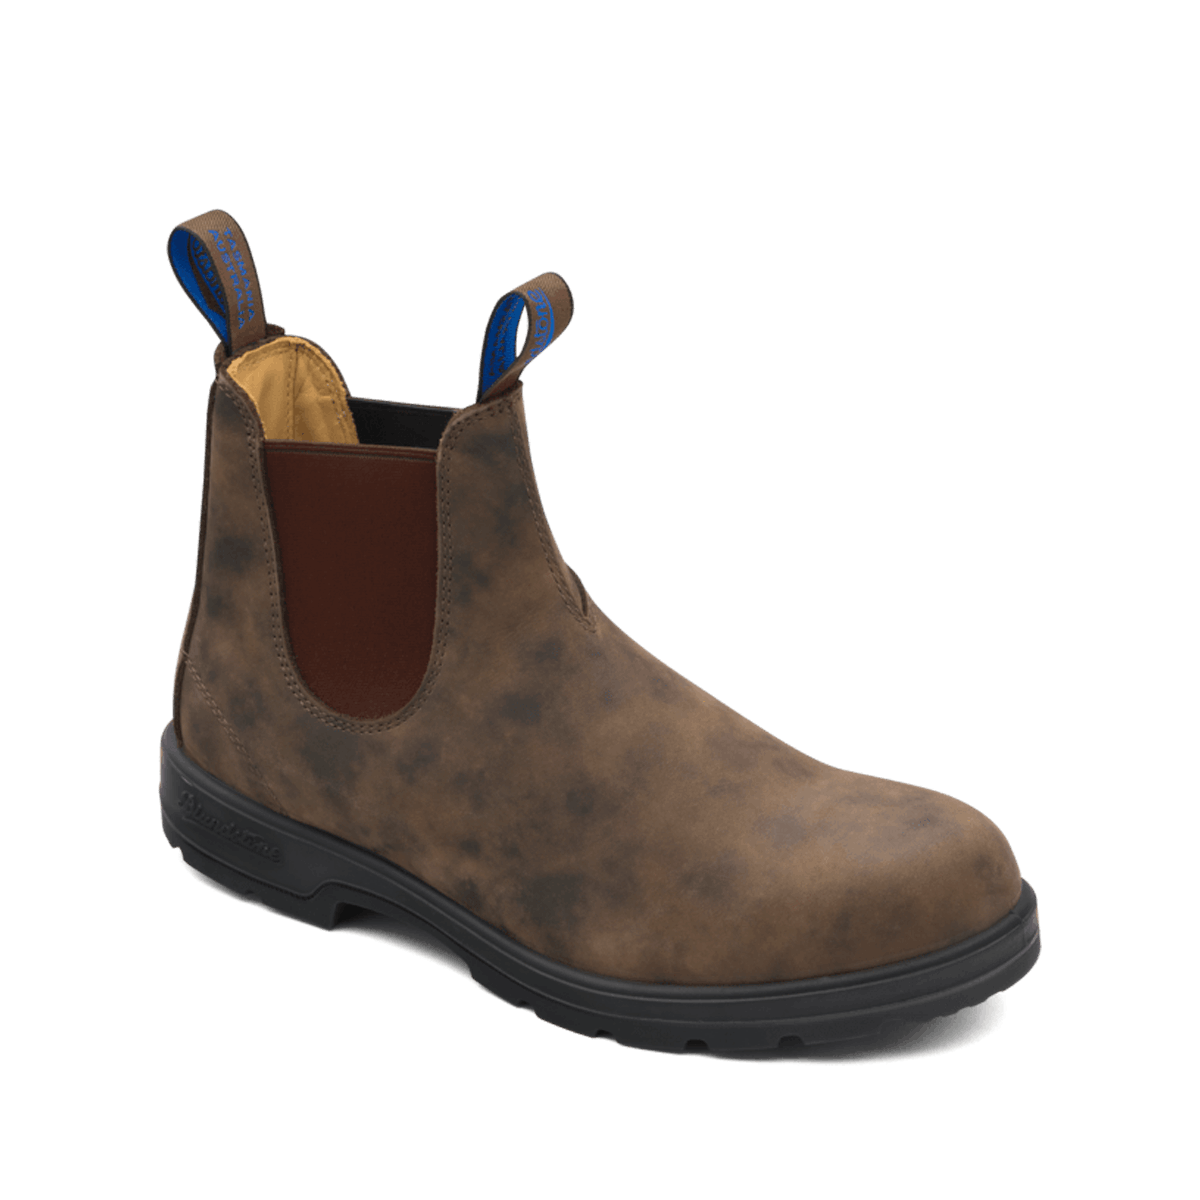 #584 thermal boots